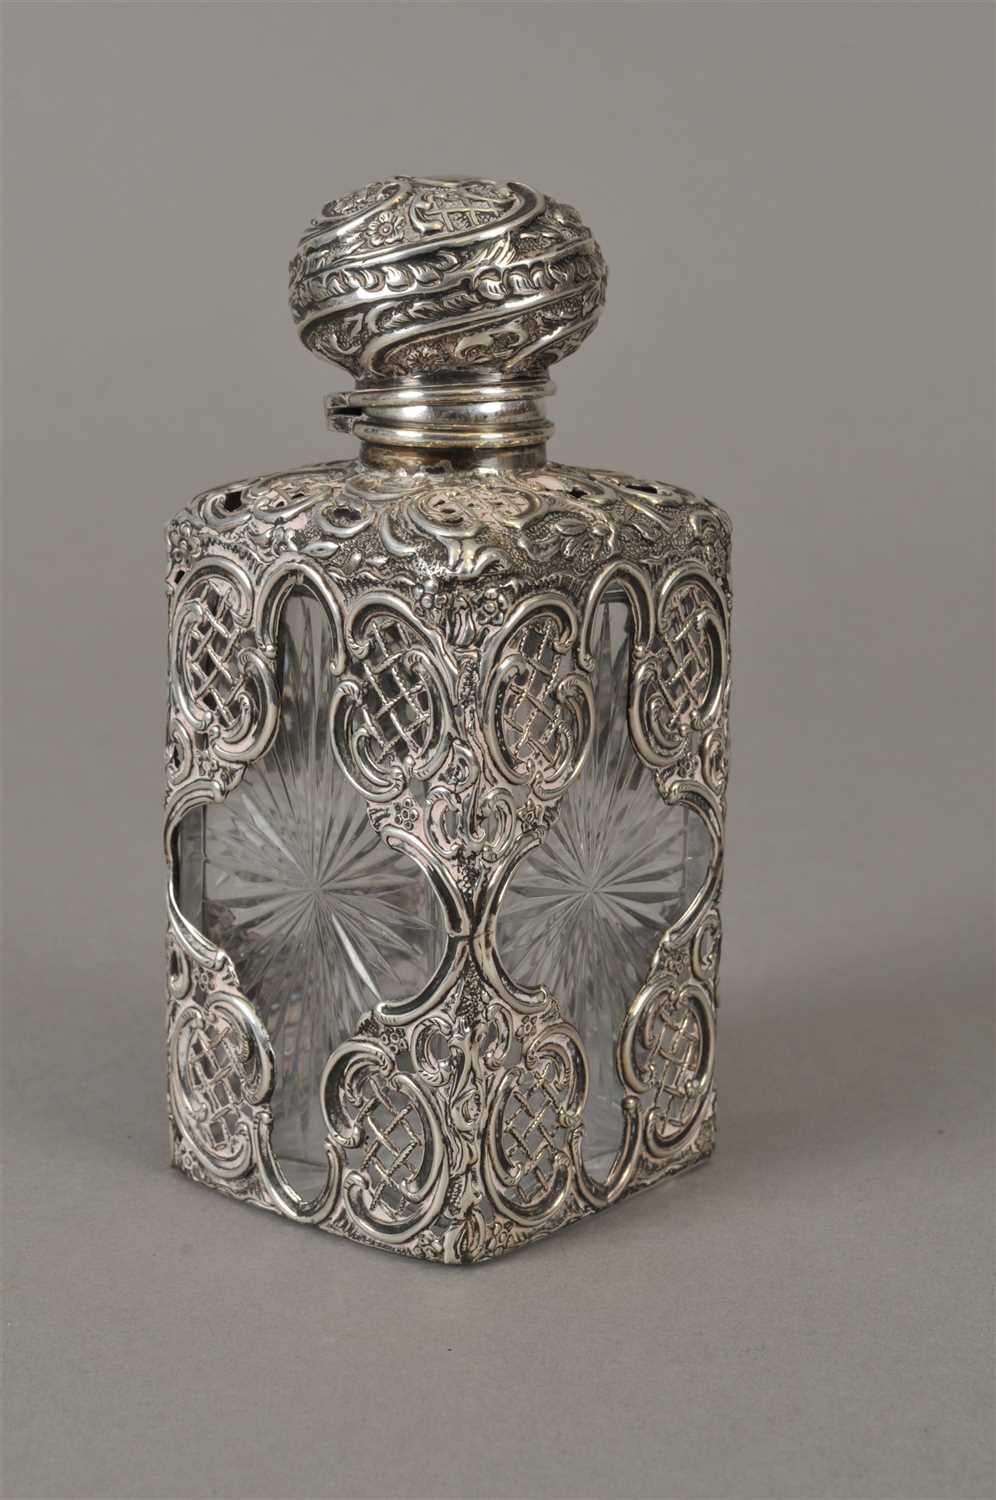 Lot 22 - A silver mounted glass scent bottle